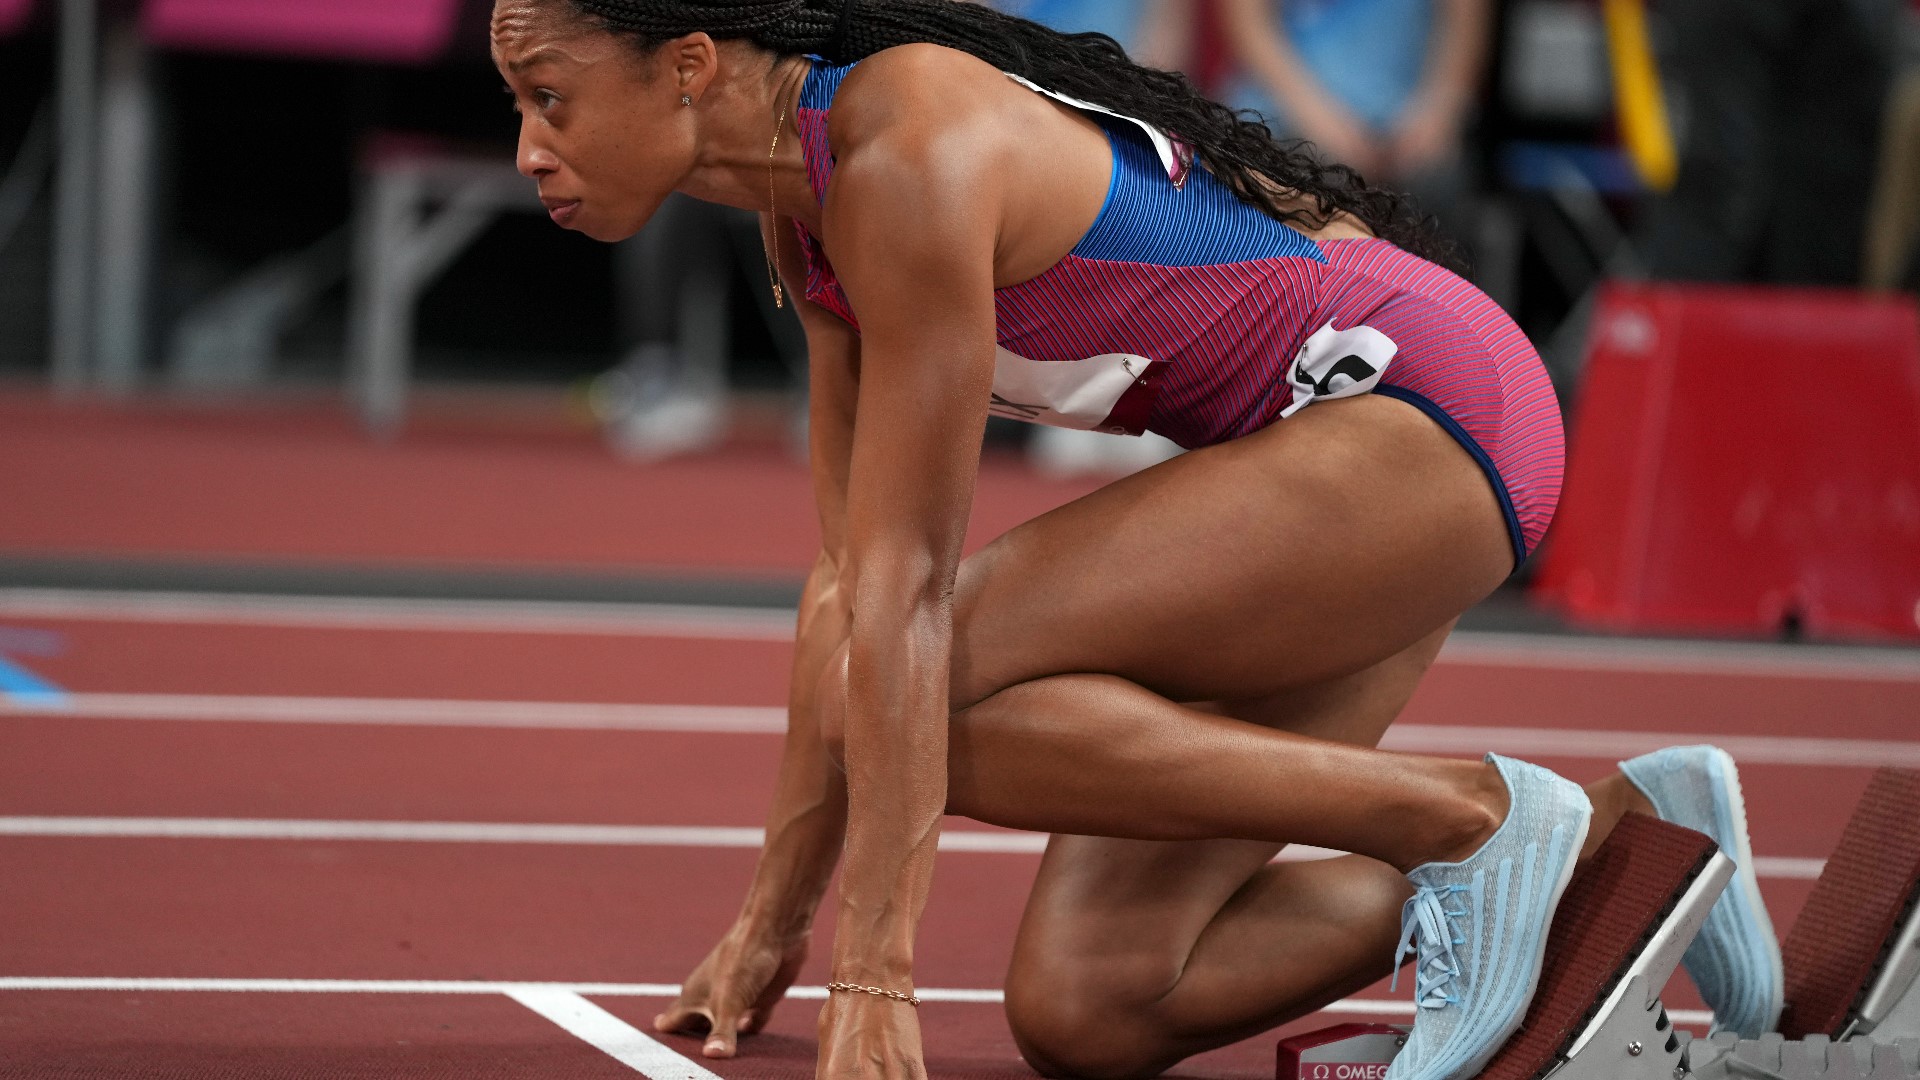 The American sprinting champion became the most decorated woman in track and field when she won the 400 meter bronze in her own shoe brand 'Saysh.'